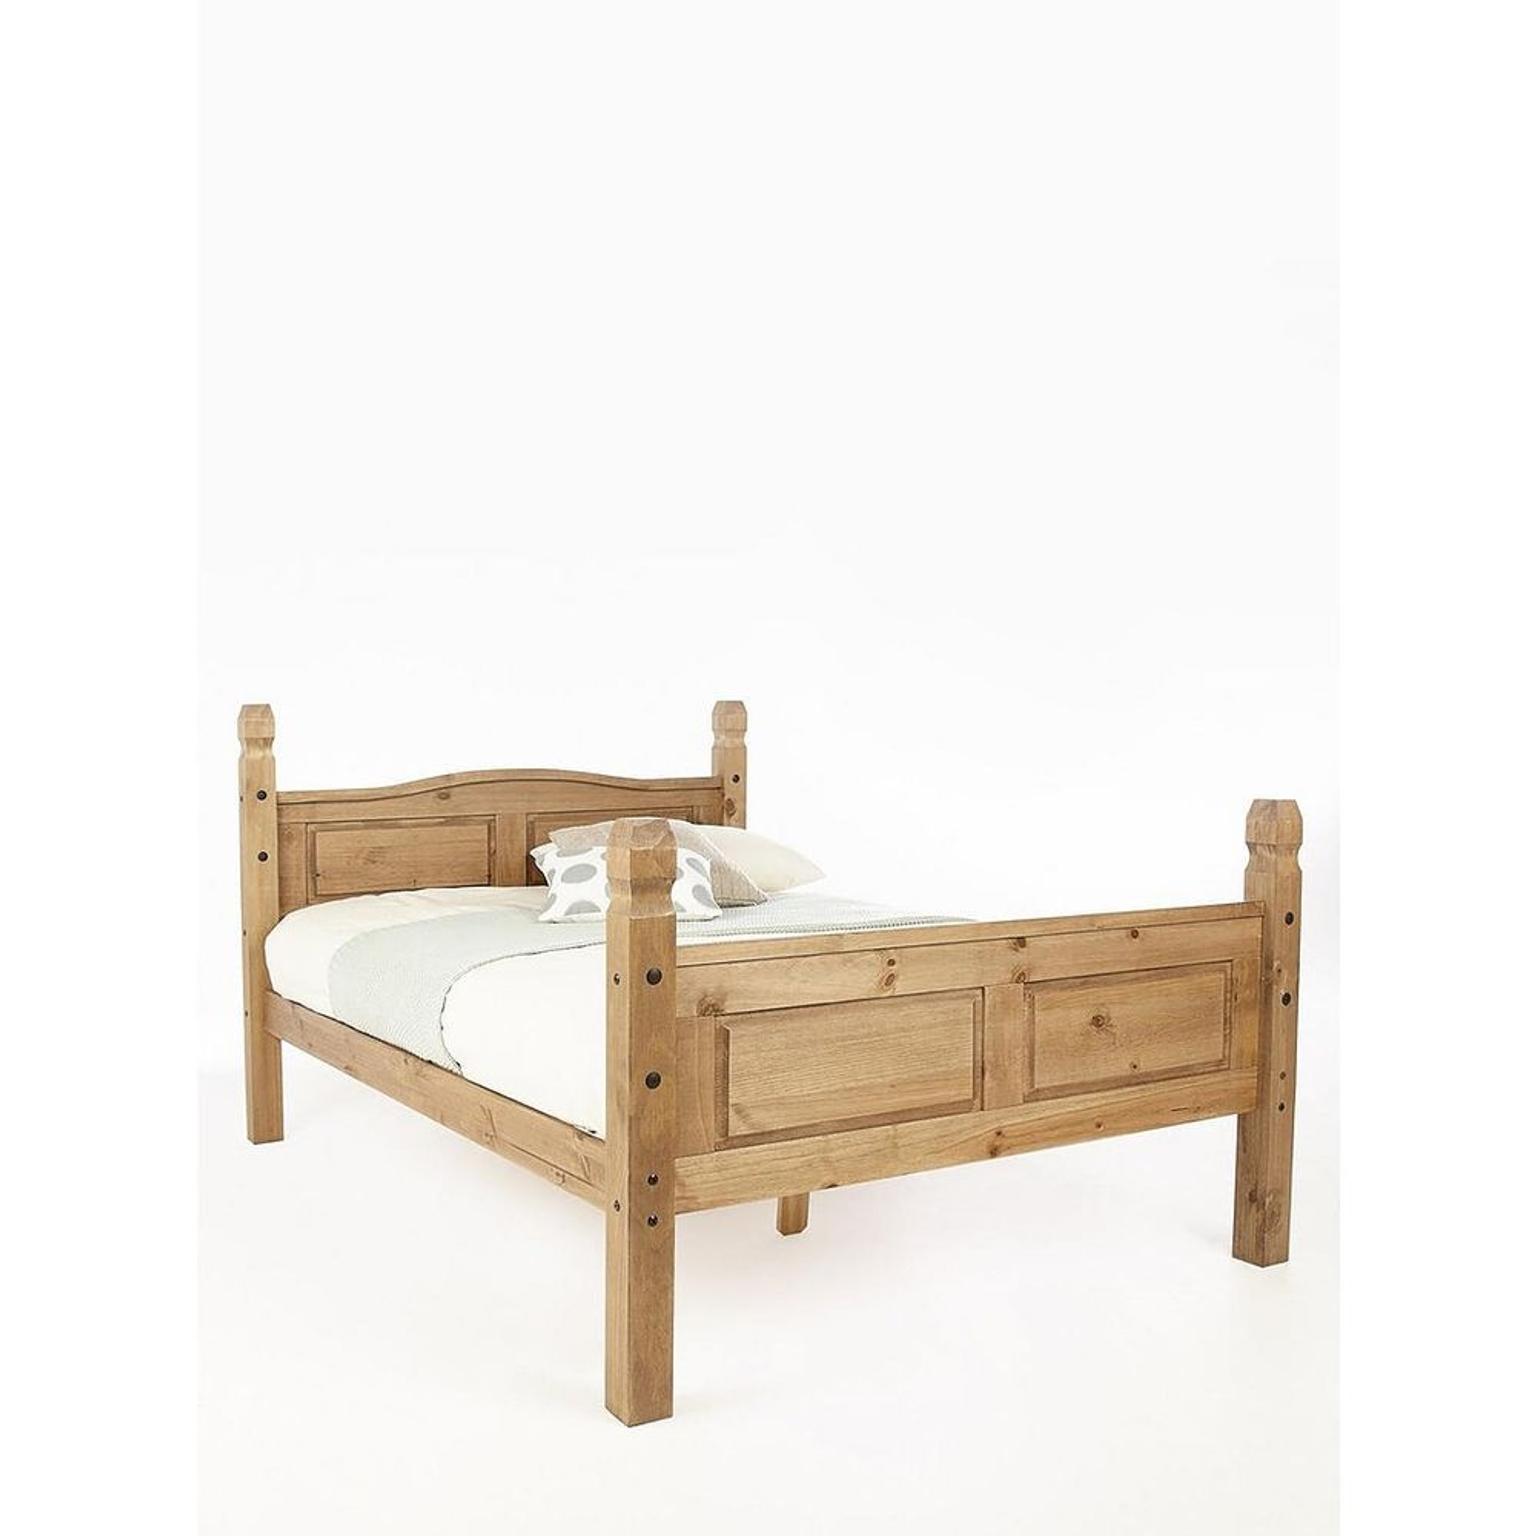 Corona Solid Pine King Size Bed High Foot End In M350bn Failsworth Fur 110 00 Zum Verkauf Shpock At